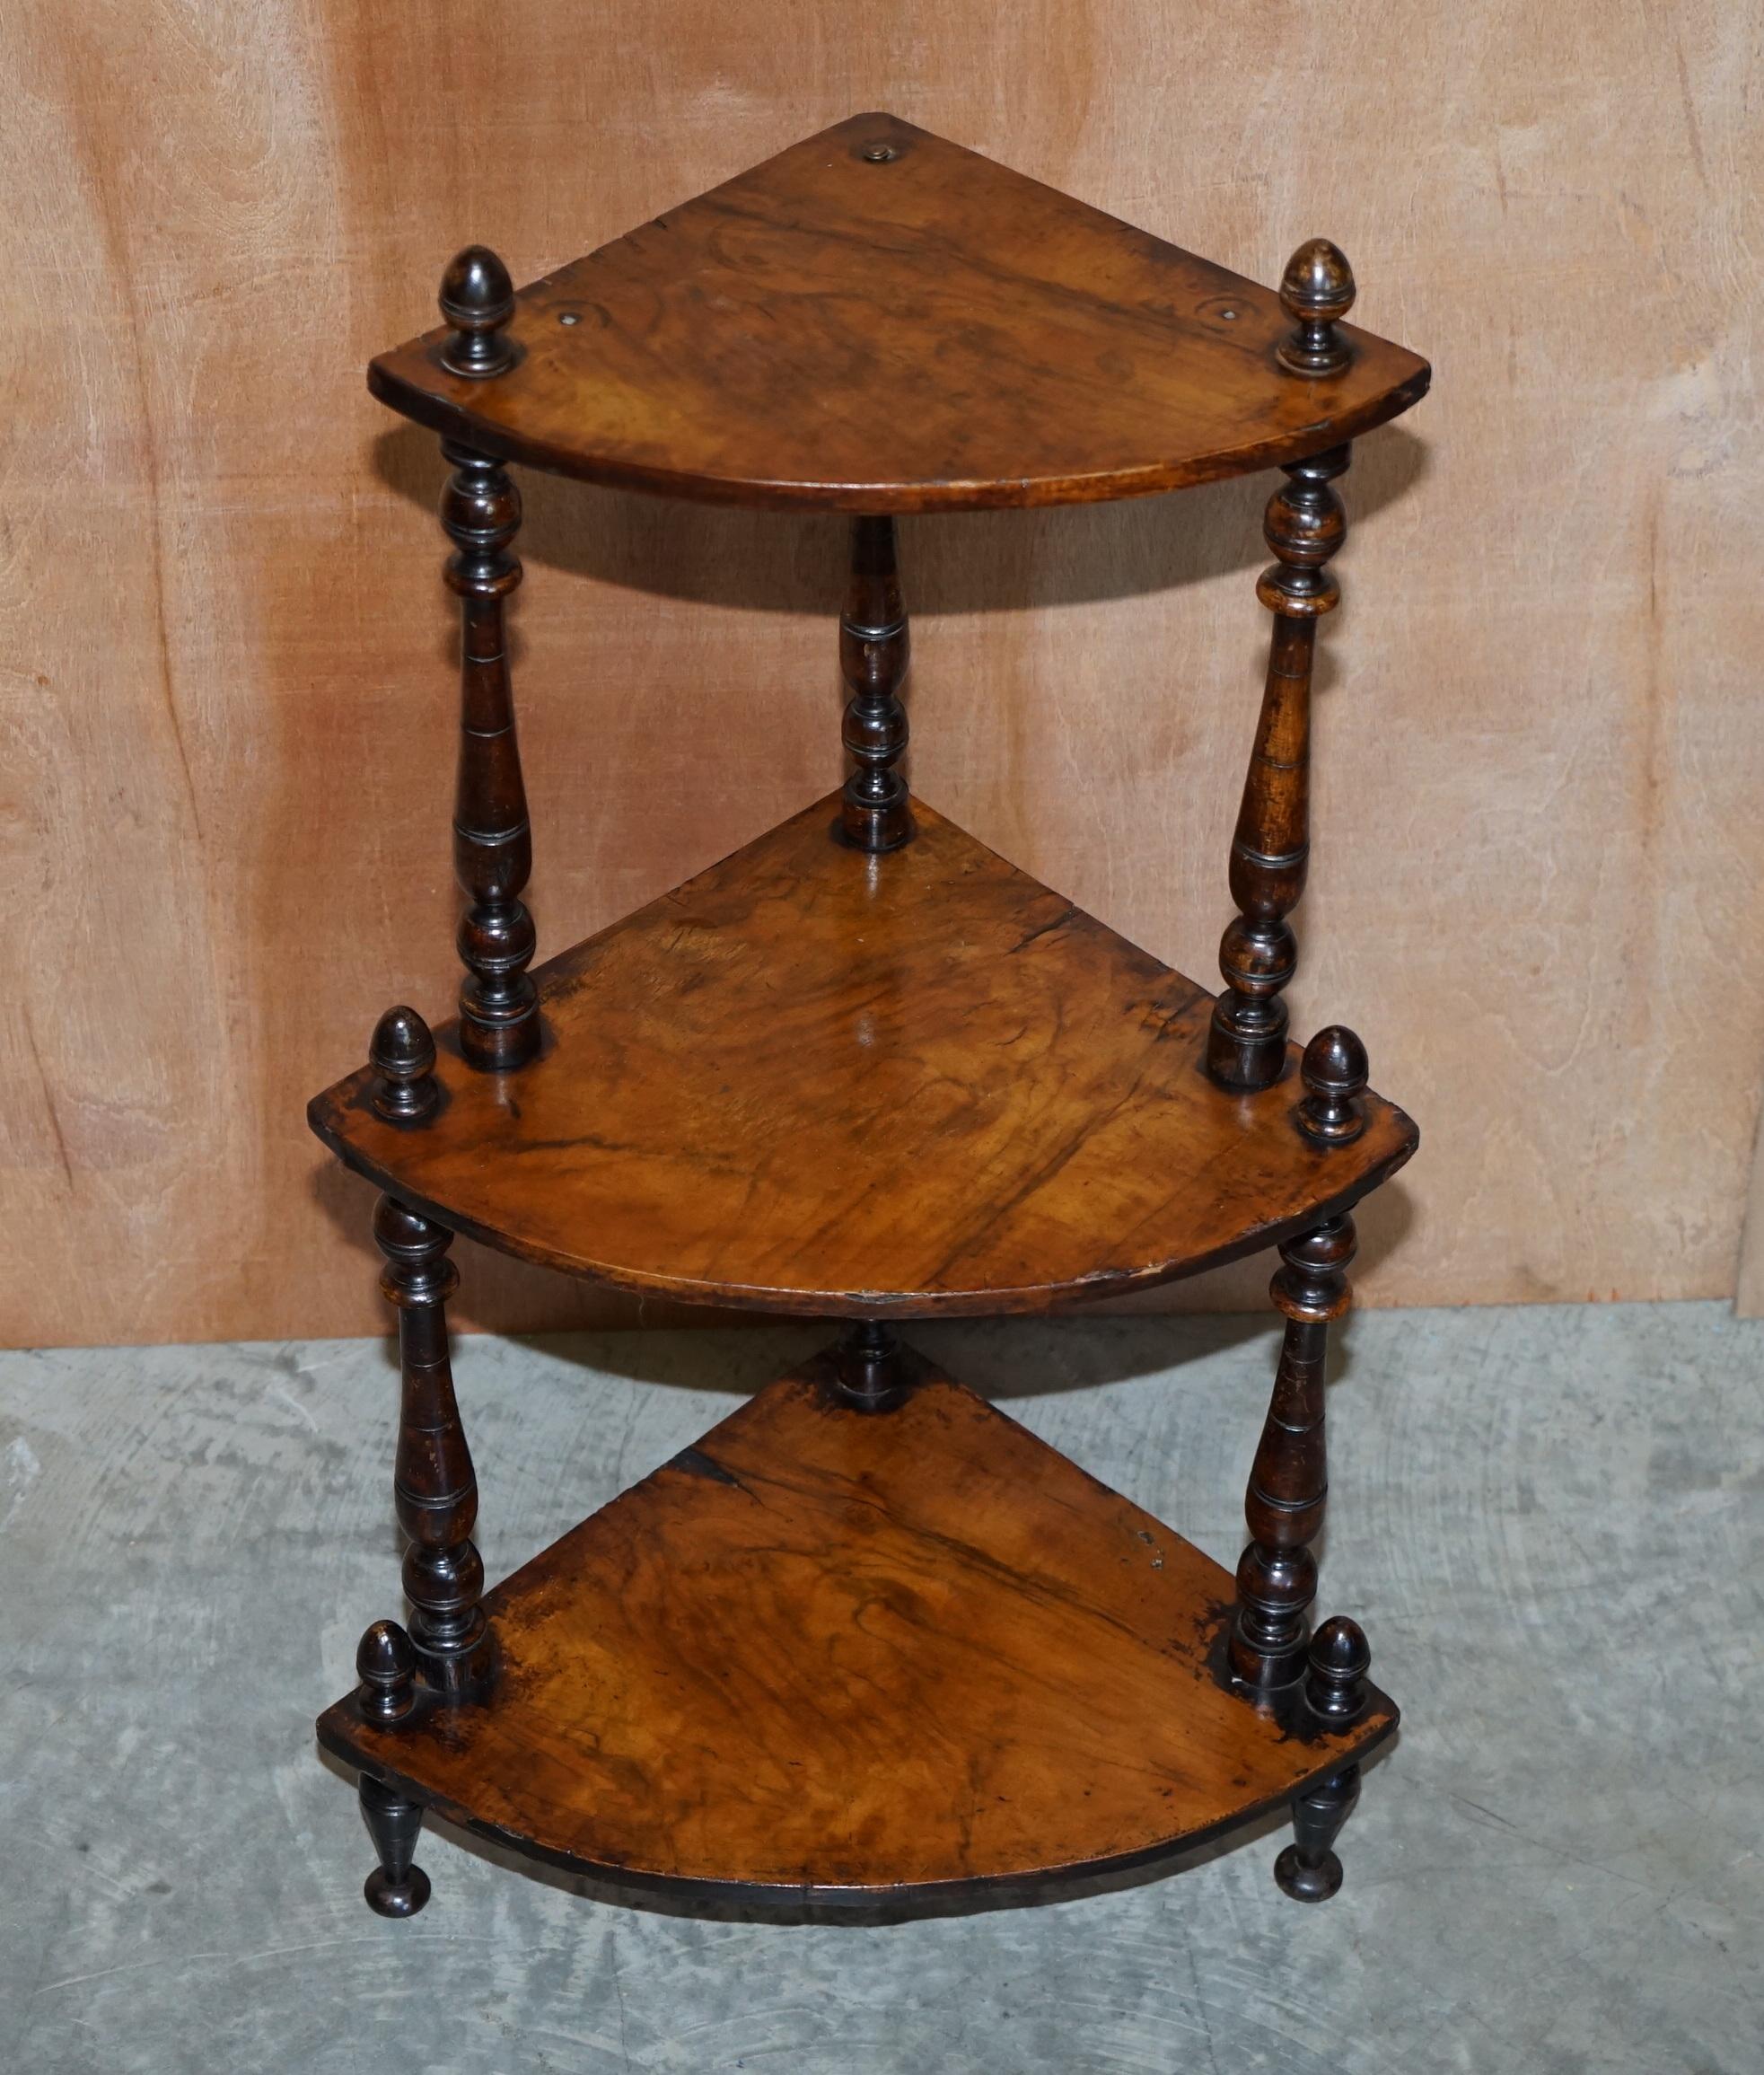 We are delighted to offer this original patina mid Victorian circa 1860 Walnut Whatnot corner display stand

This is an original patina piece, it has some losses, distressing to the veneer and original patination for 160+ years of use. We have